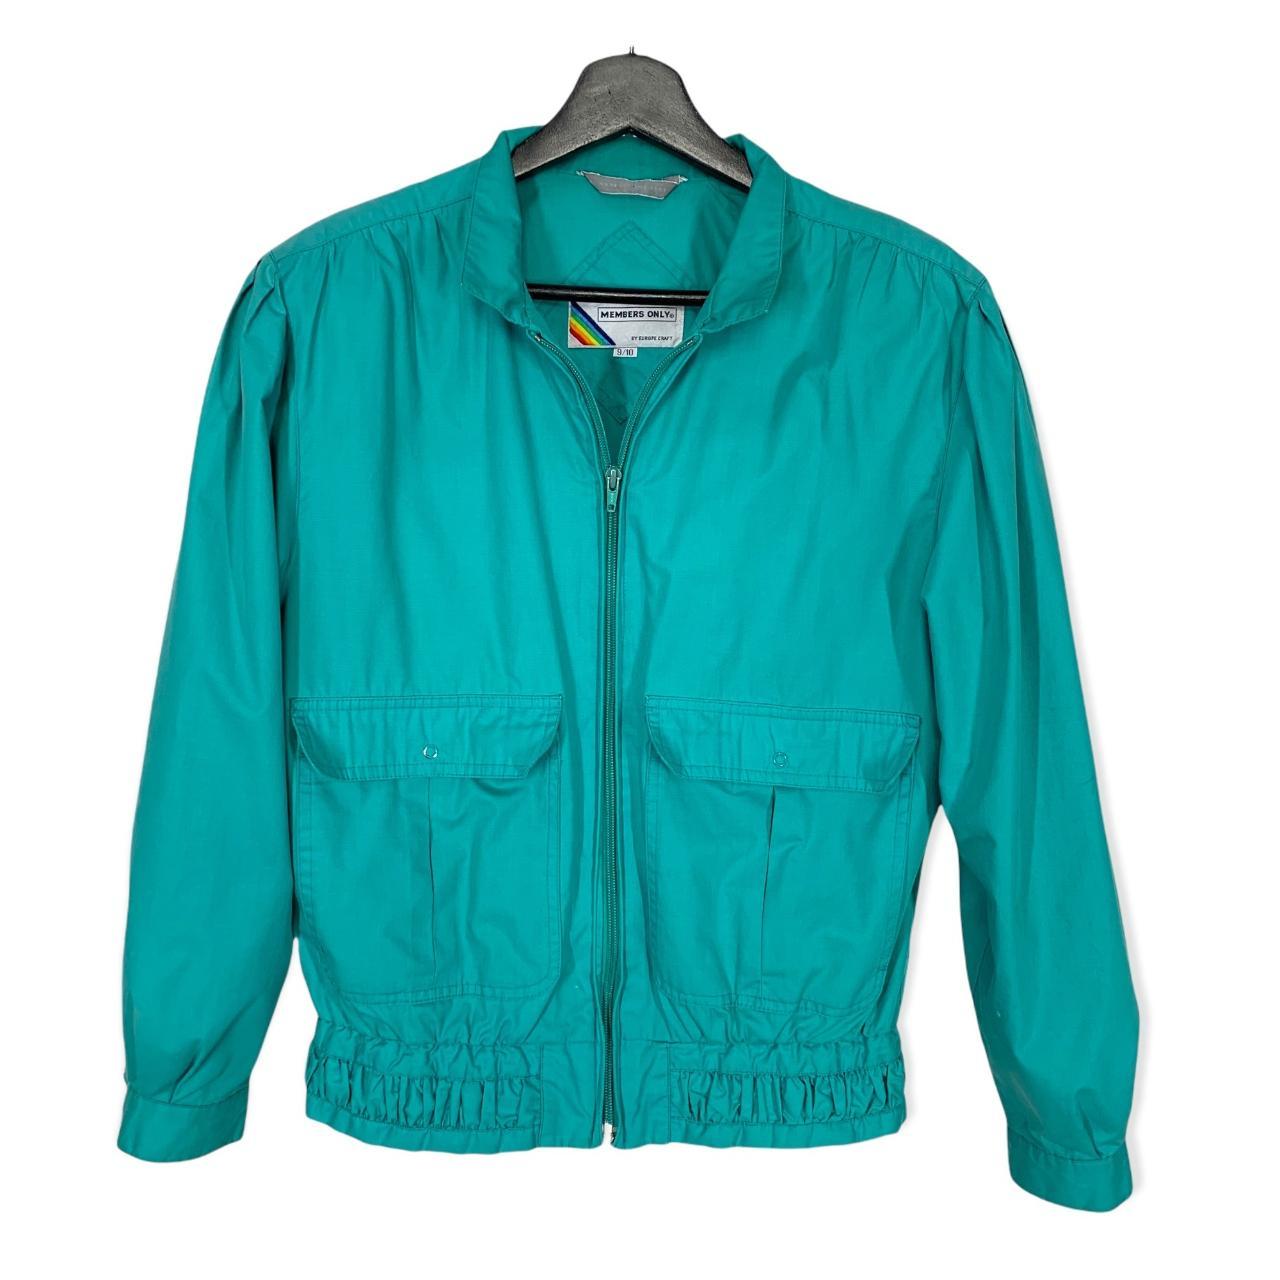 Product Image 1 - Vintage 80s Turquoise Members Only